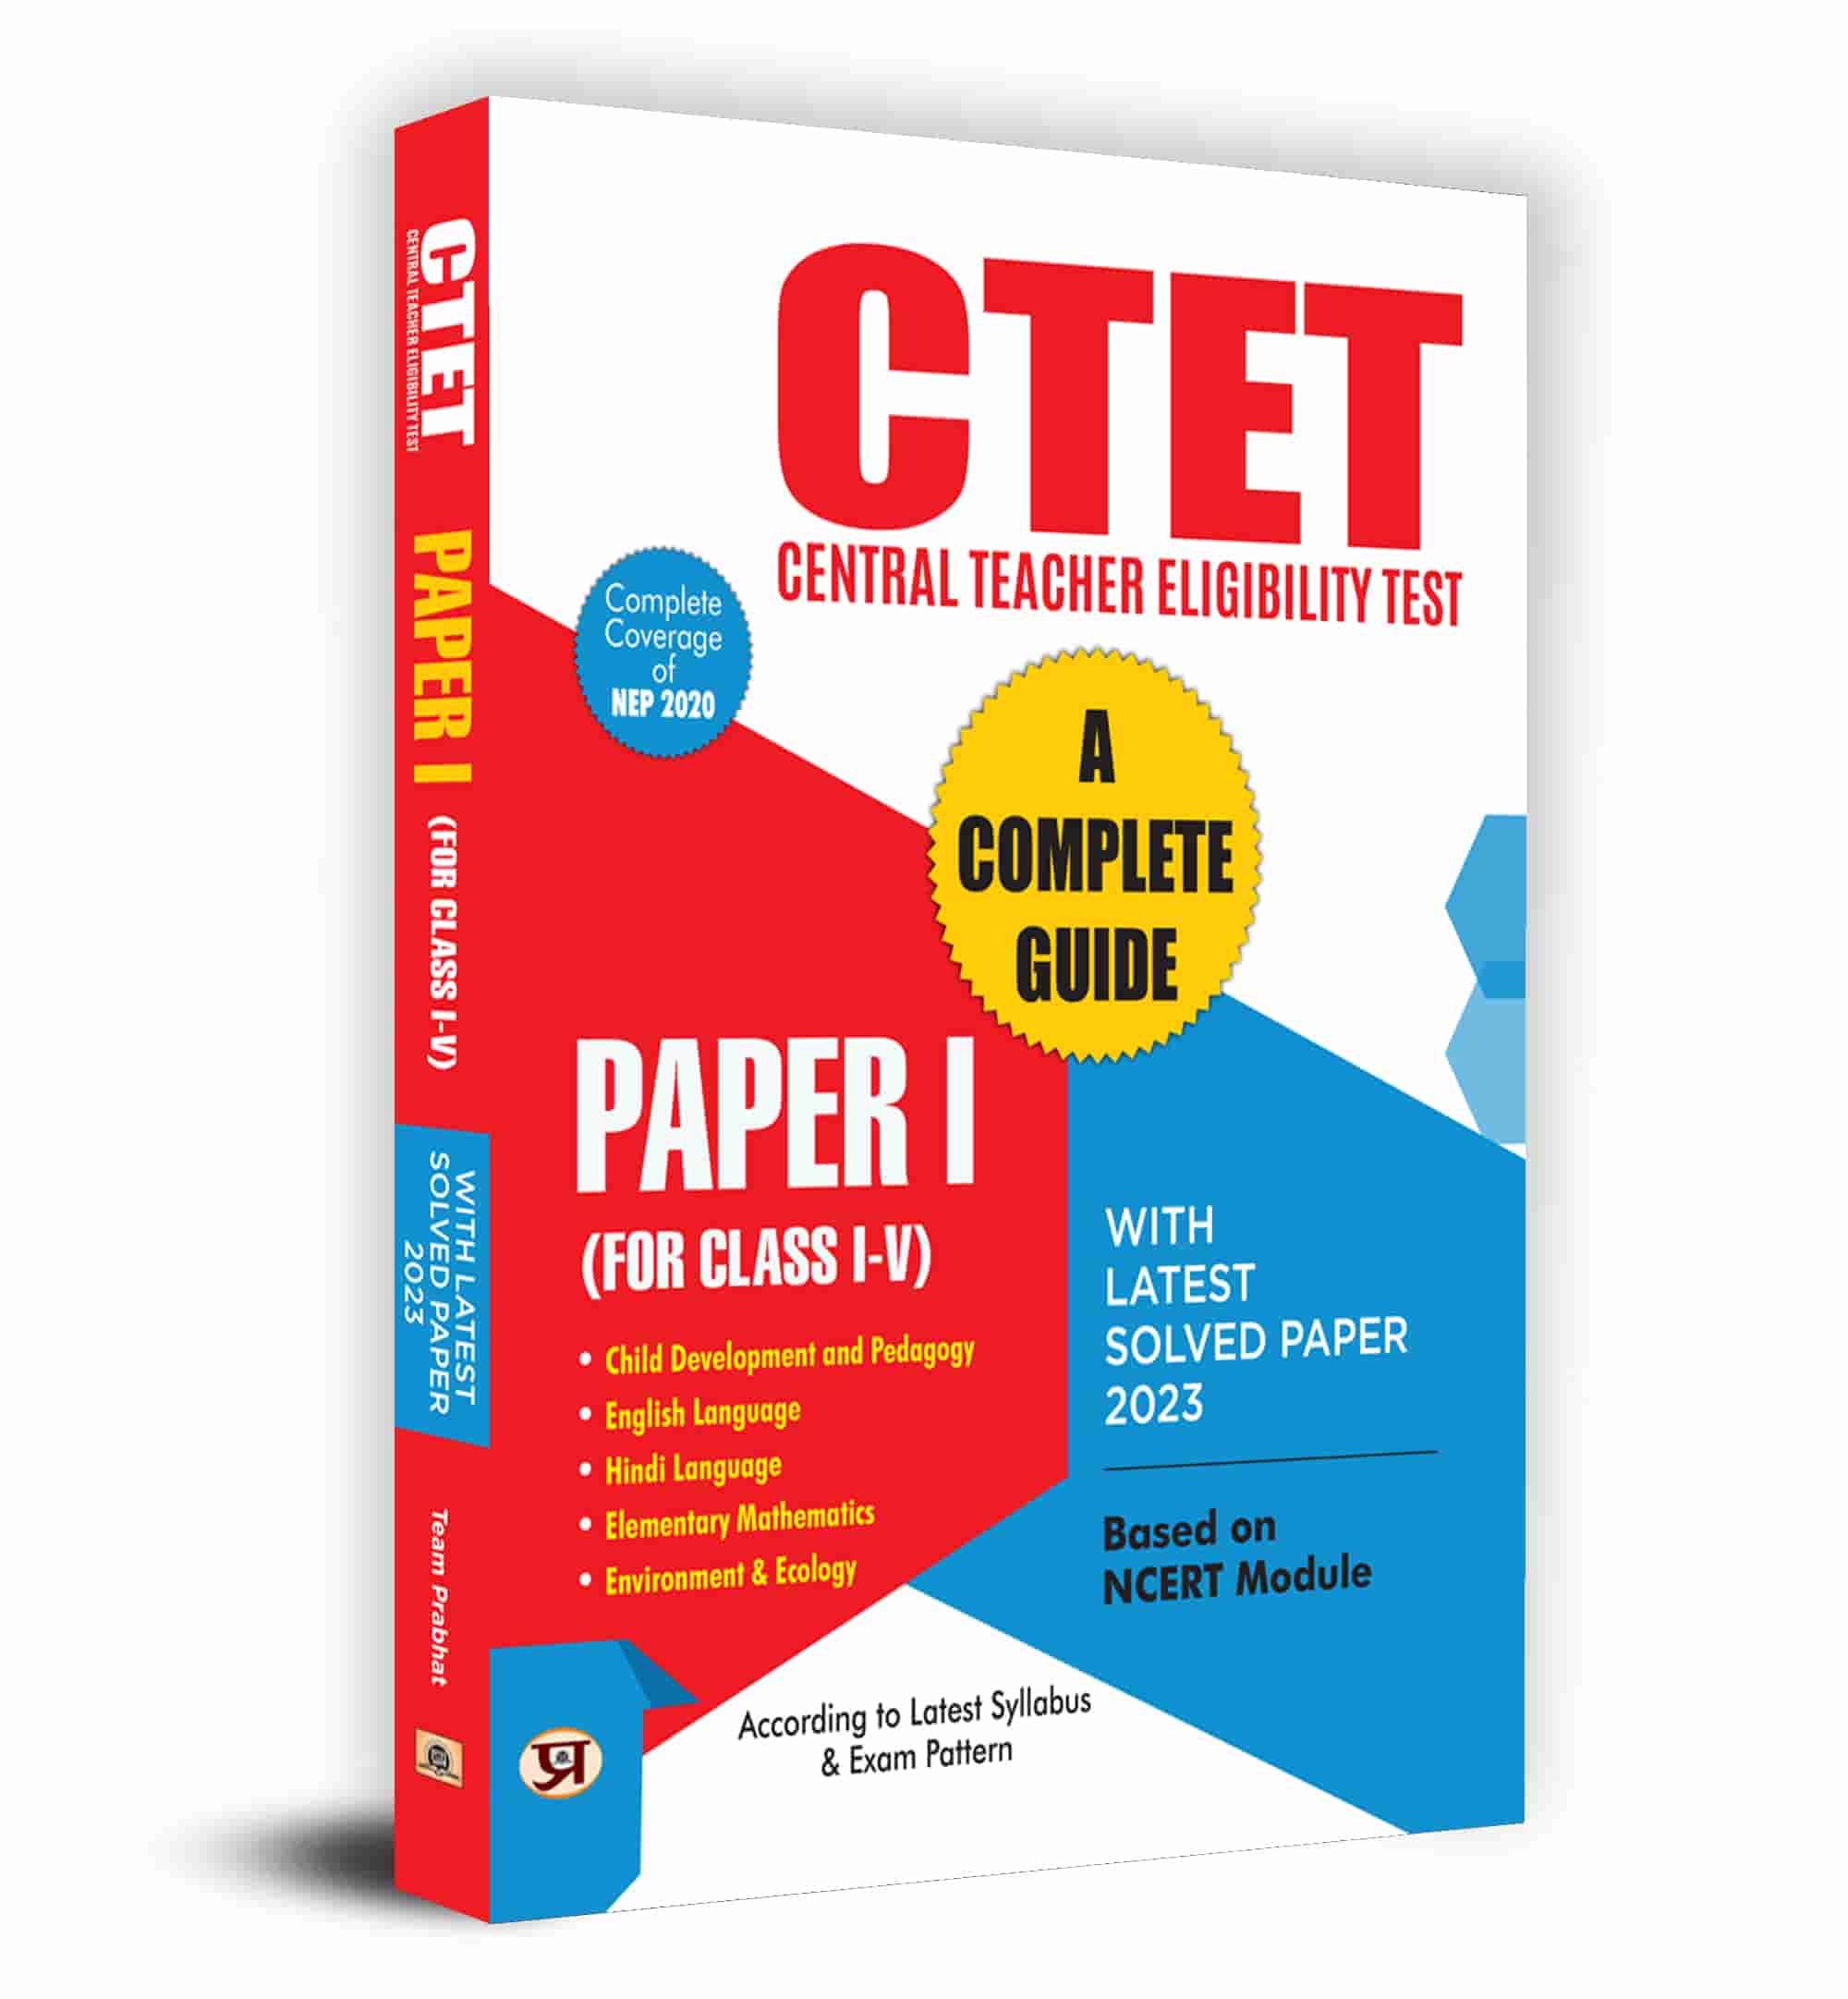 CTET Central Teacher Eligibility Test A Complete Guide Paper-1 (For Class: I-V) with Latest Solved Paper